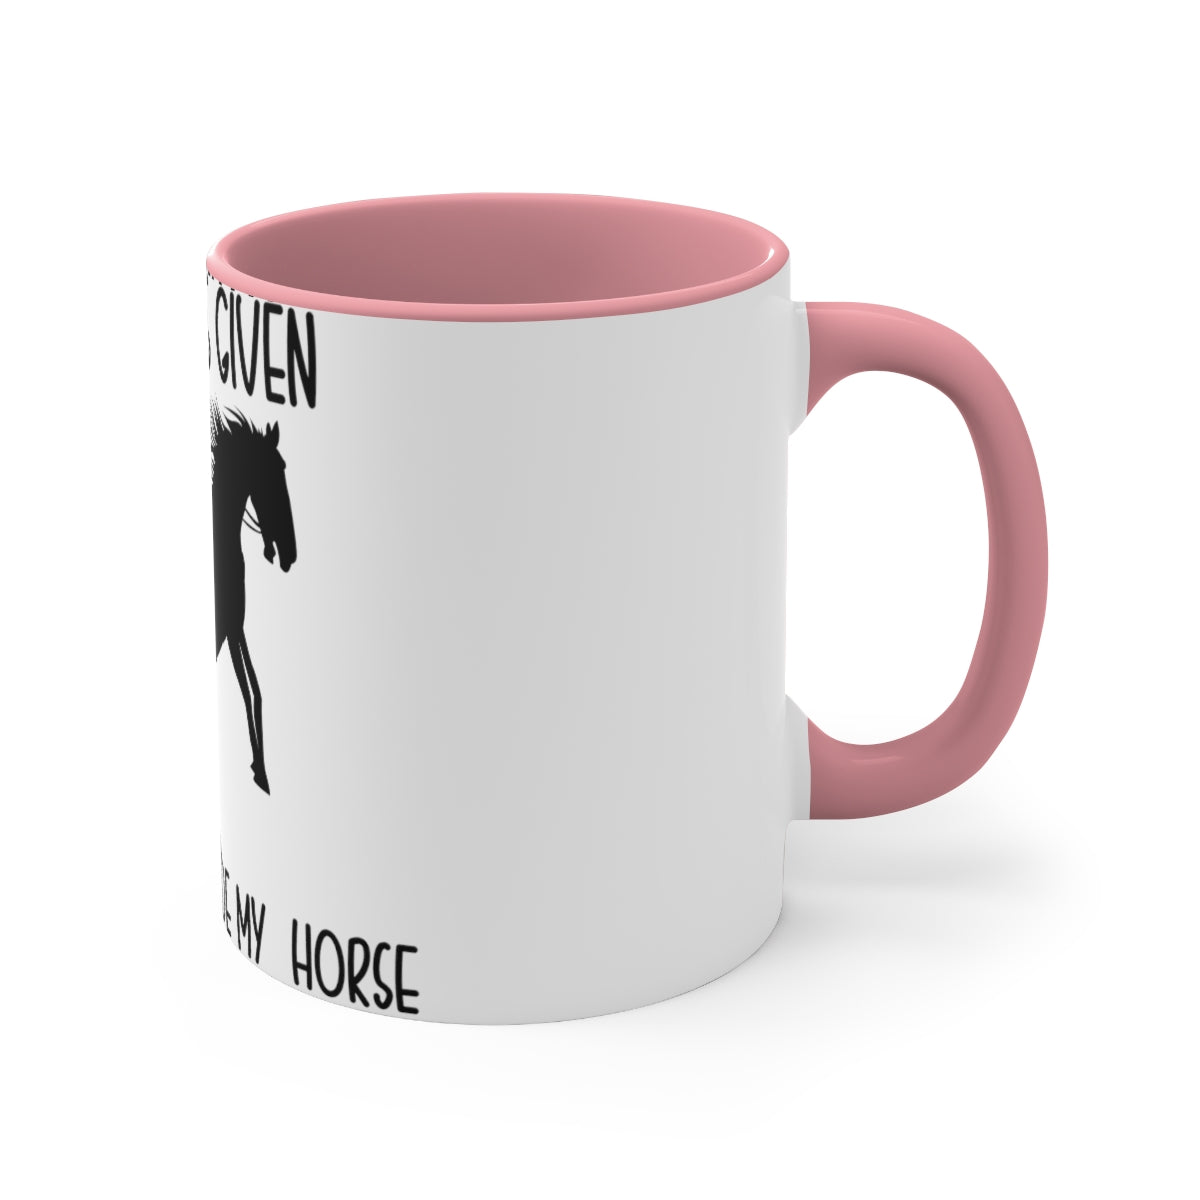 Cowgirl Gift Horse Lover Gift Zero F*cks Given Riding My Horse Accent Coffee Mug 11 ounce Coffee Mug Gift